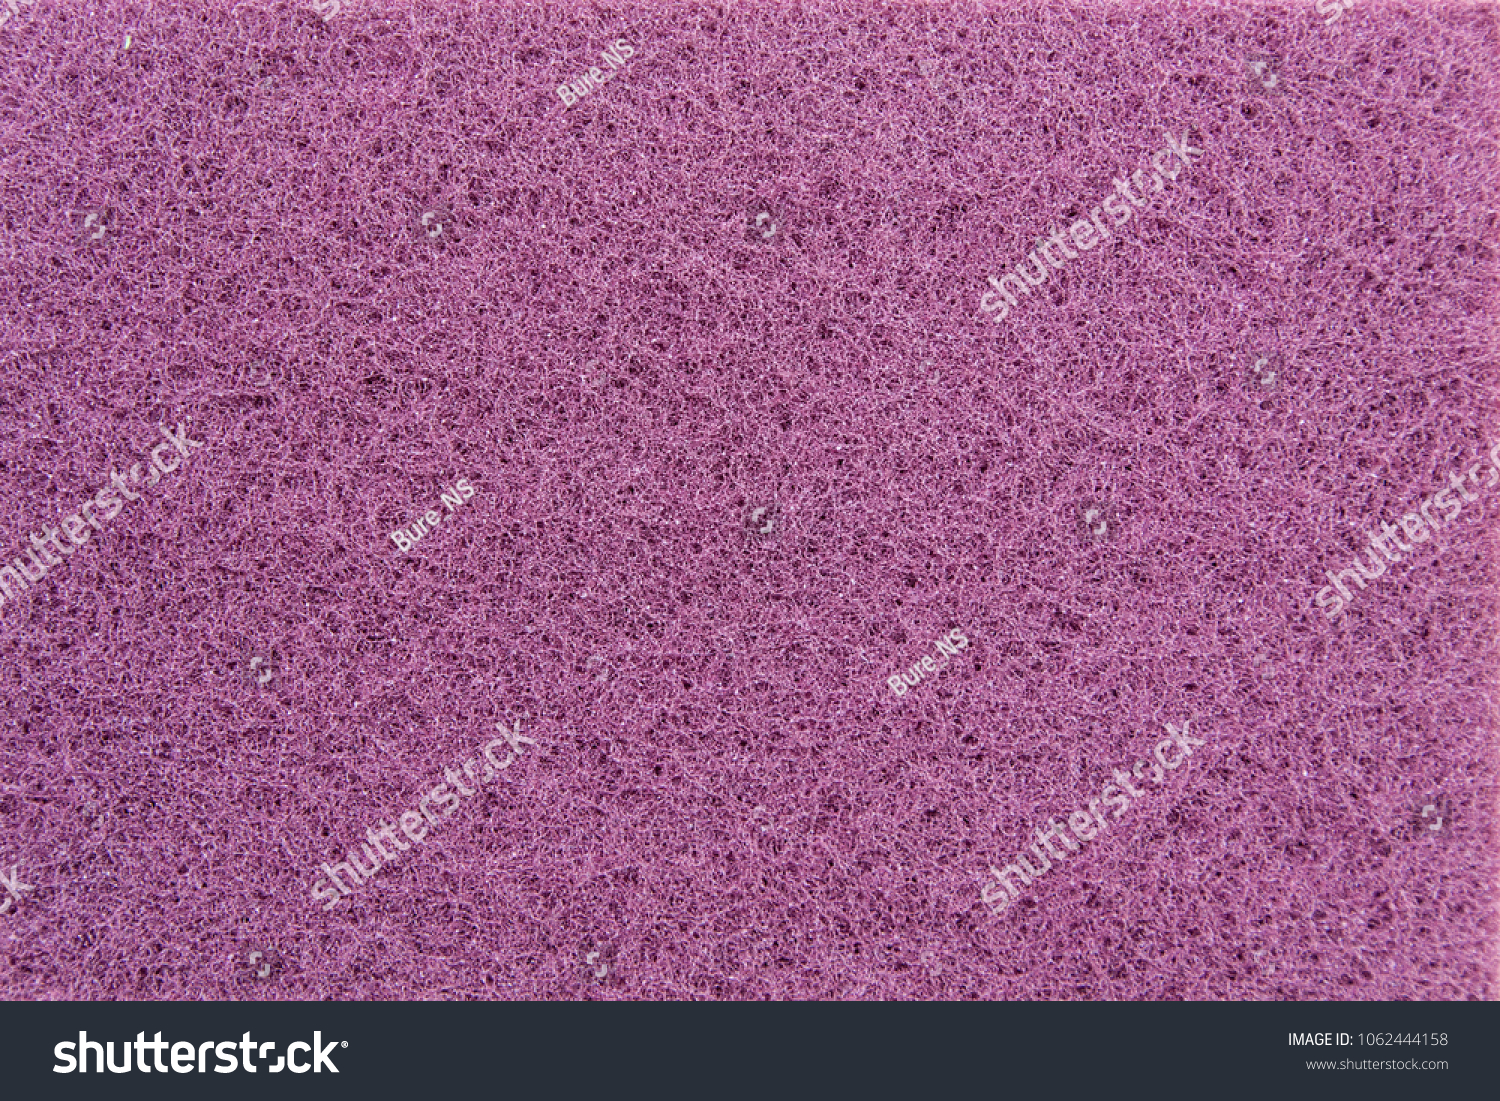 Background of textile material. Polishing material for metal surfaces #1062444158